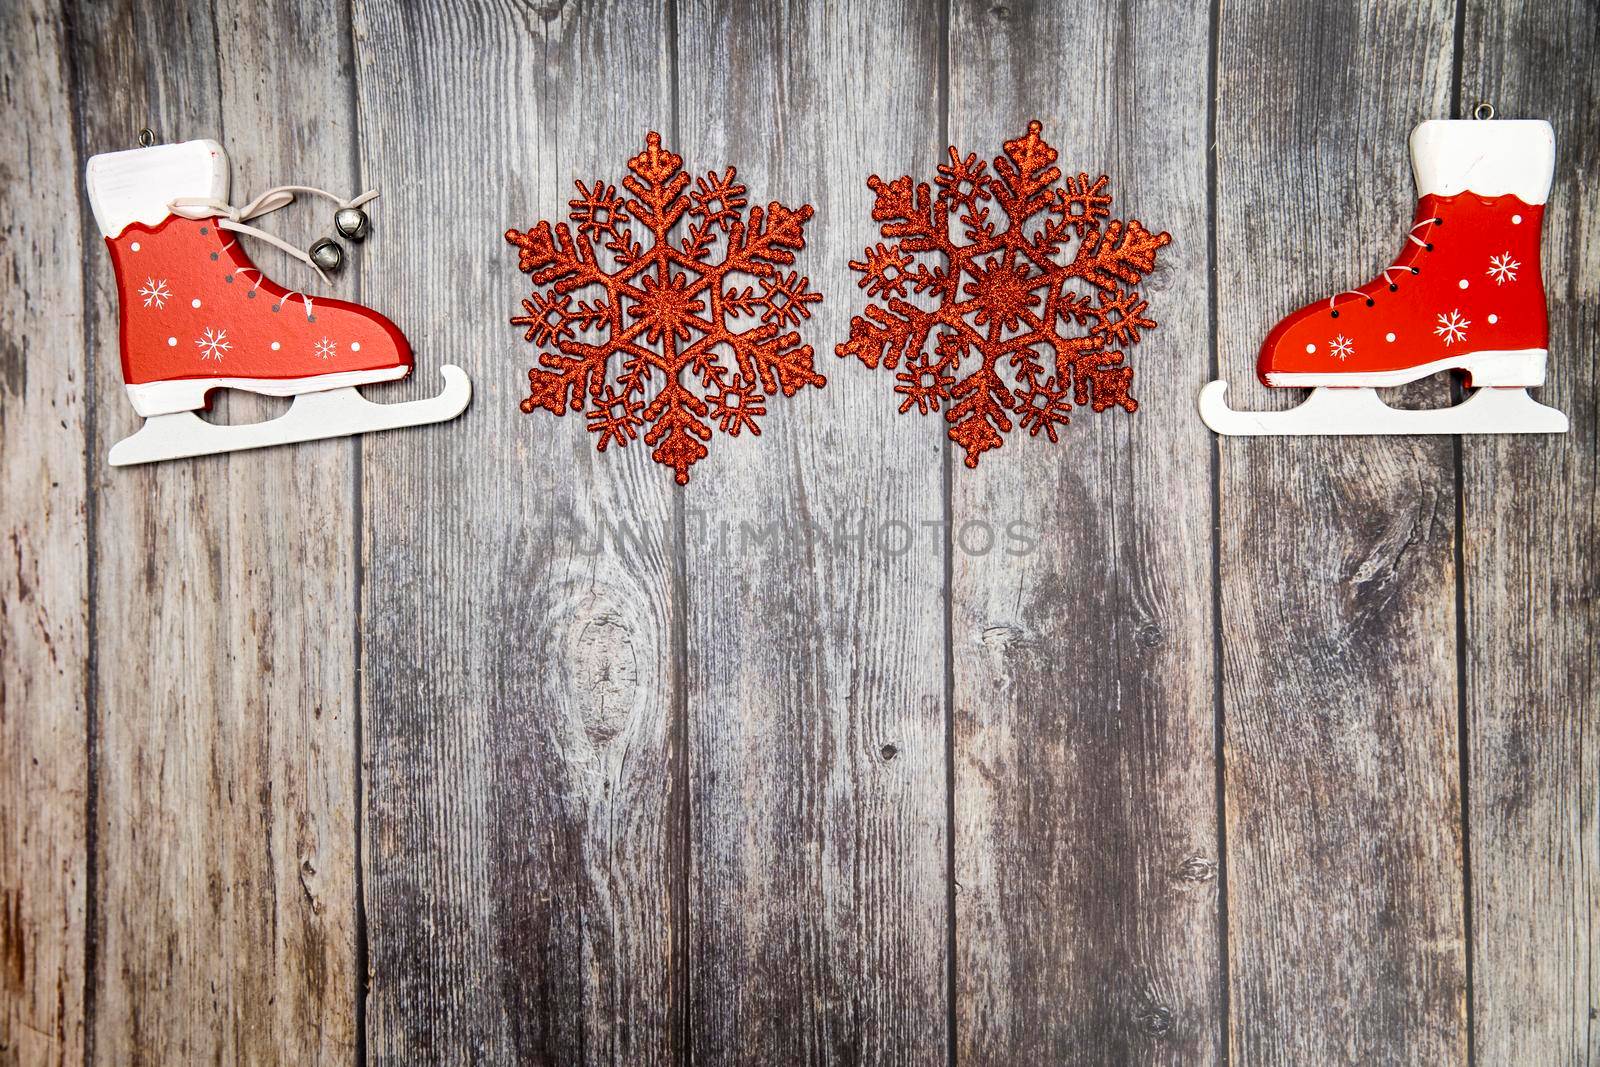 Wooden handmade snowflake toys on wooden Christmas background. Beautiful crafts cut from eco friendly wood material. Ecological home decor for winter holiday. Decorate house with natural materials